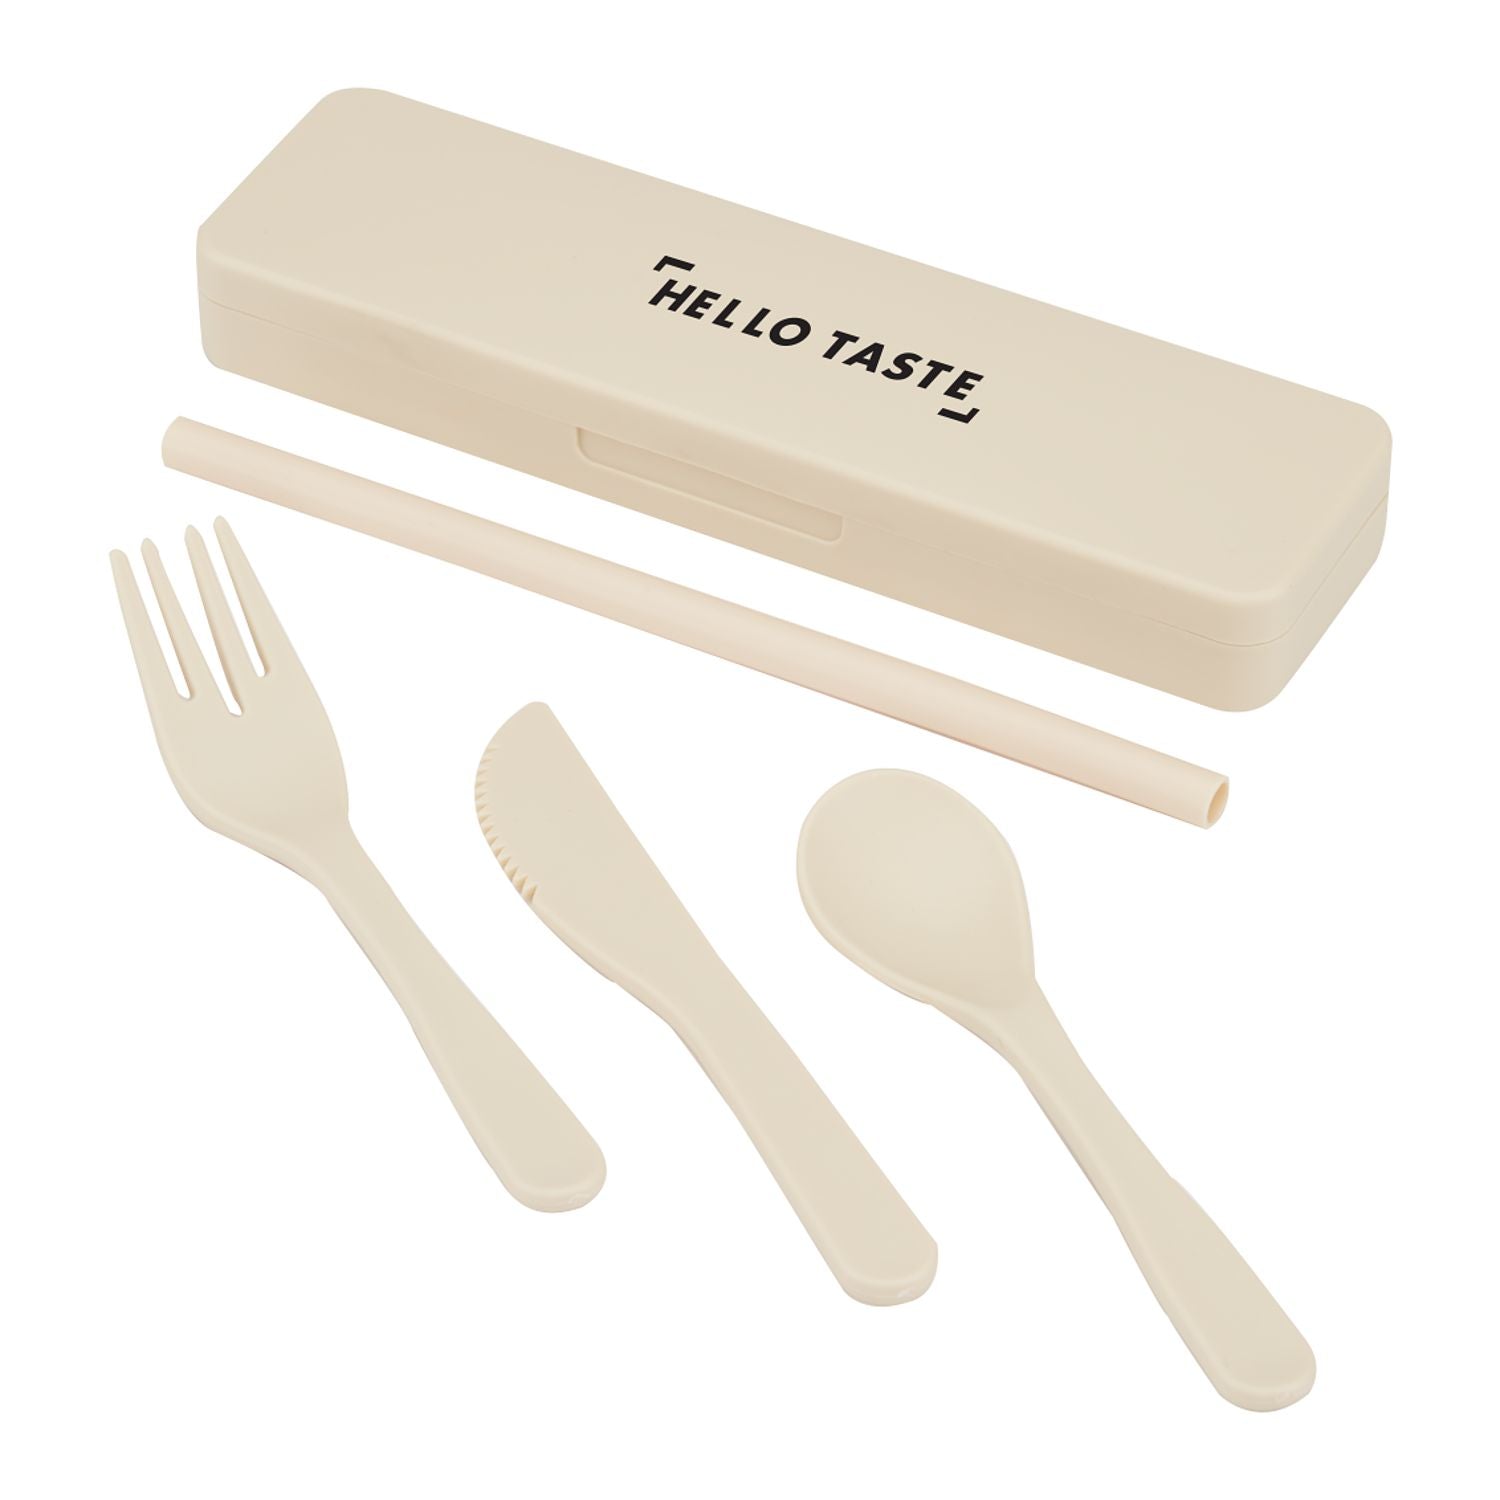 Recycled Plastic Utensil To Go Set with cream logo